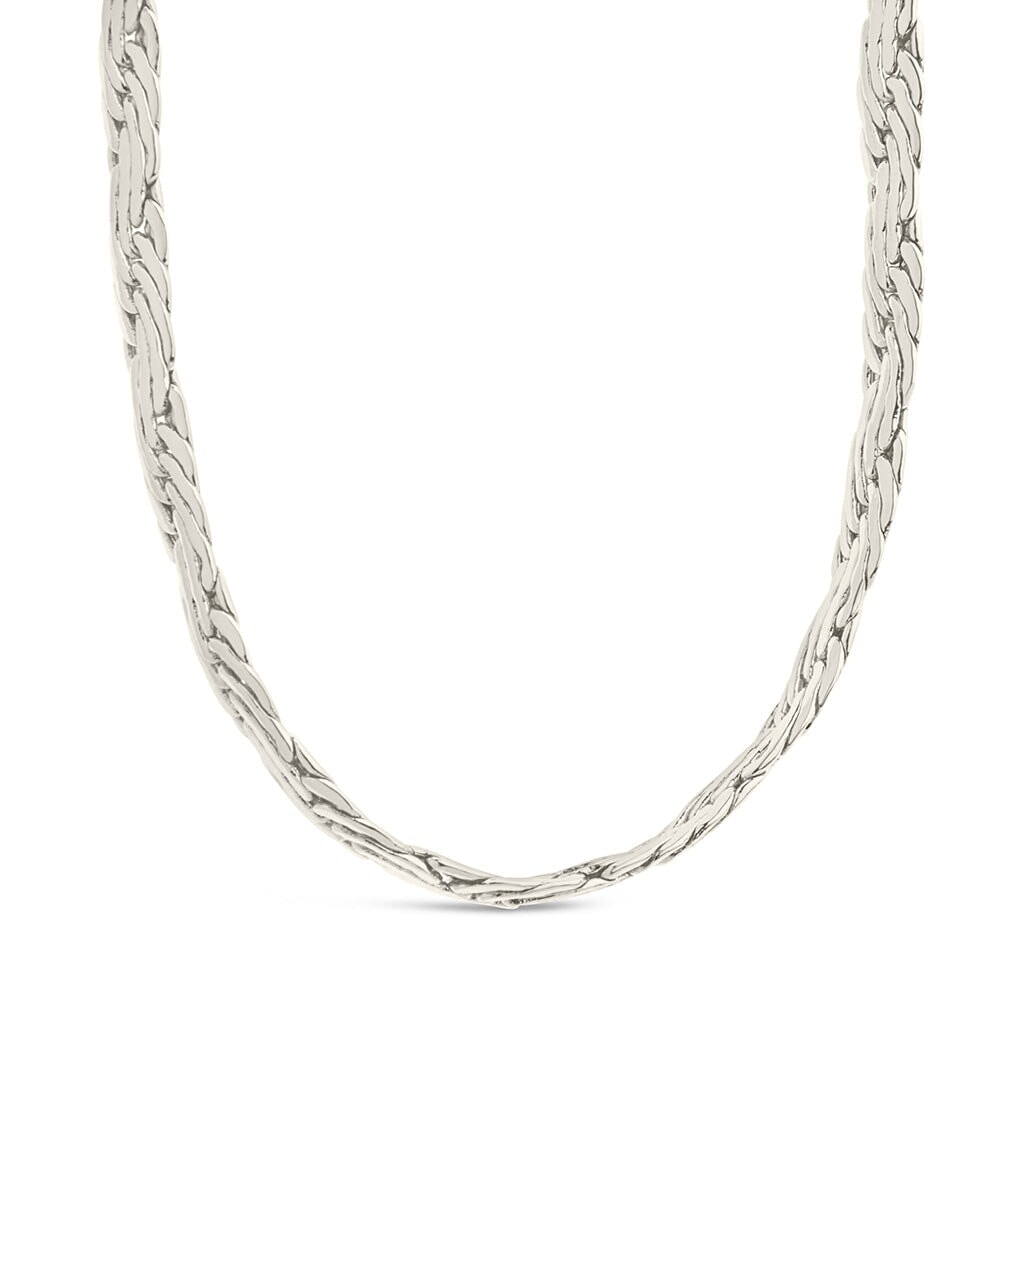 Men's Flat Wheat Chain Necklace Necklace Sterling Forever Silver 